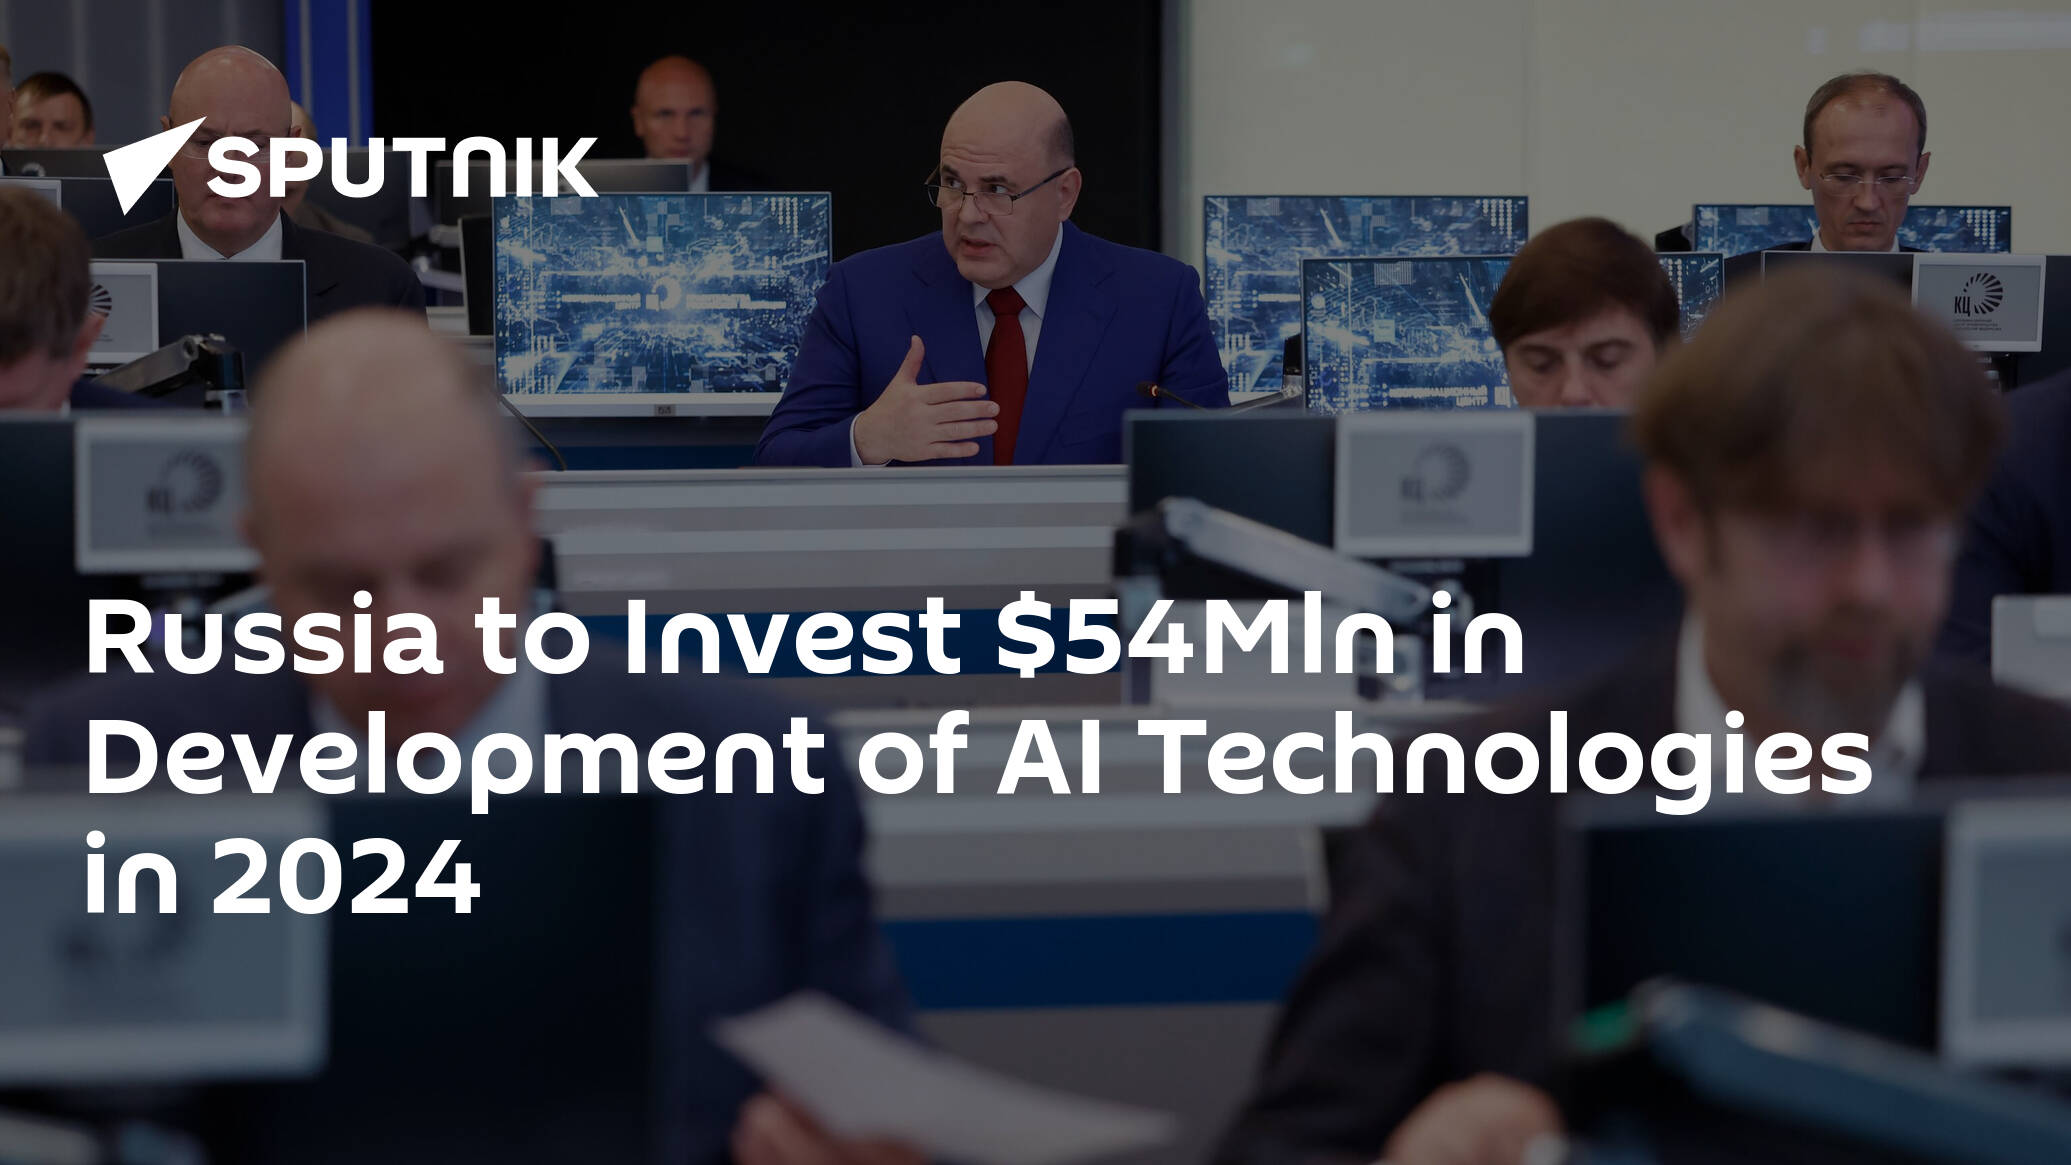 Russia to Invest $54Mln in Development of AI Technologies in 2024